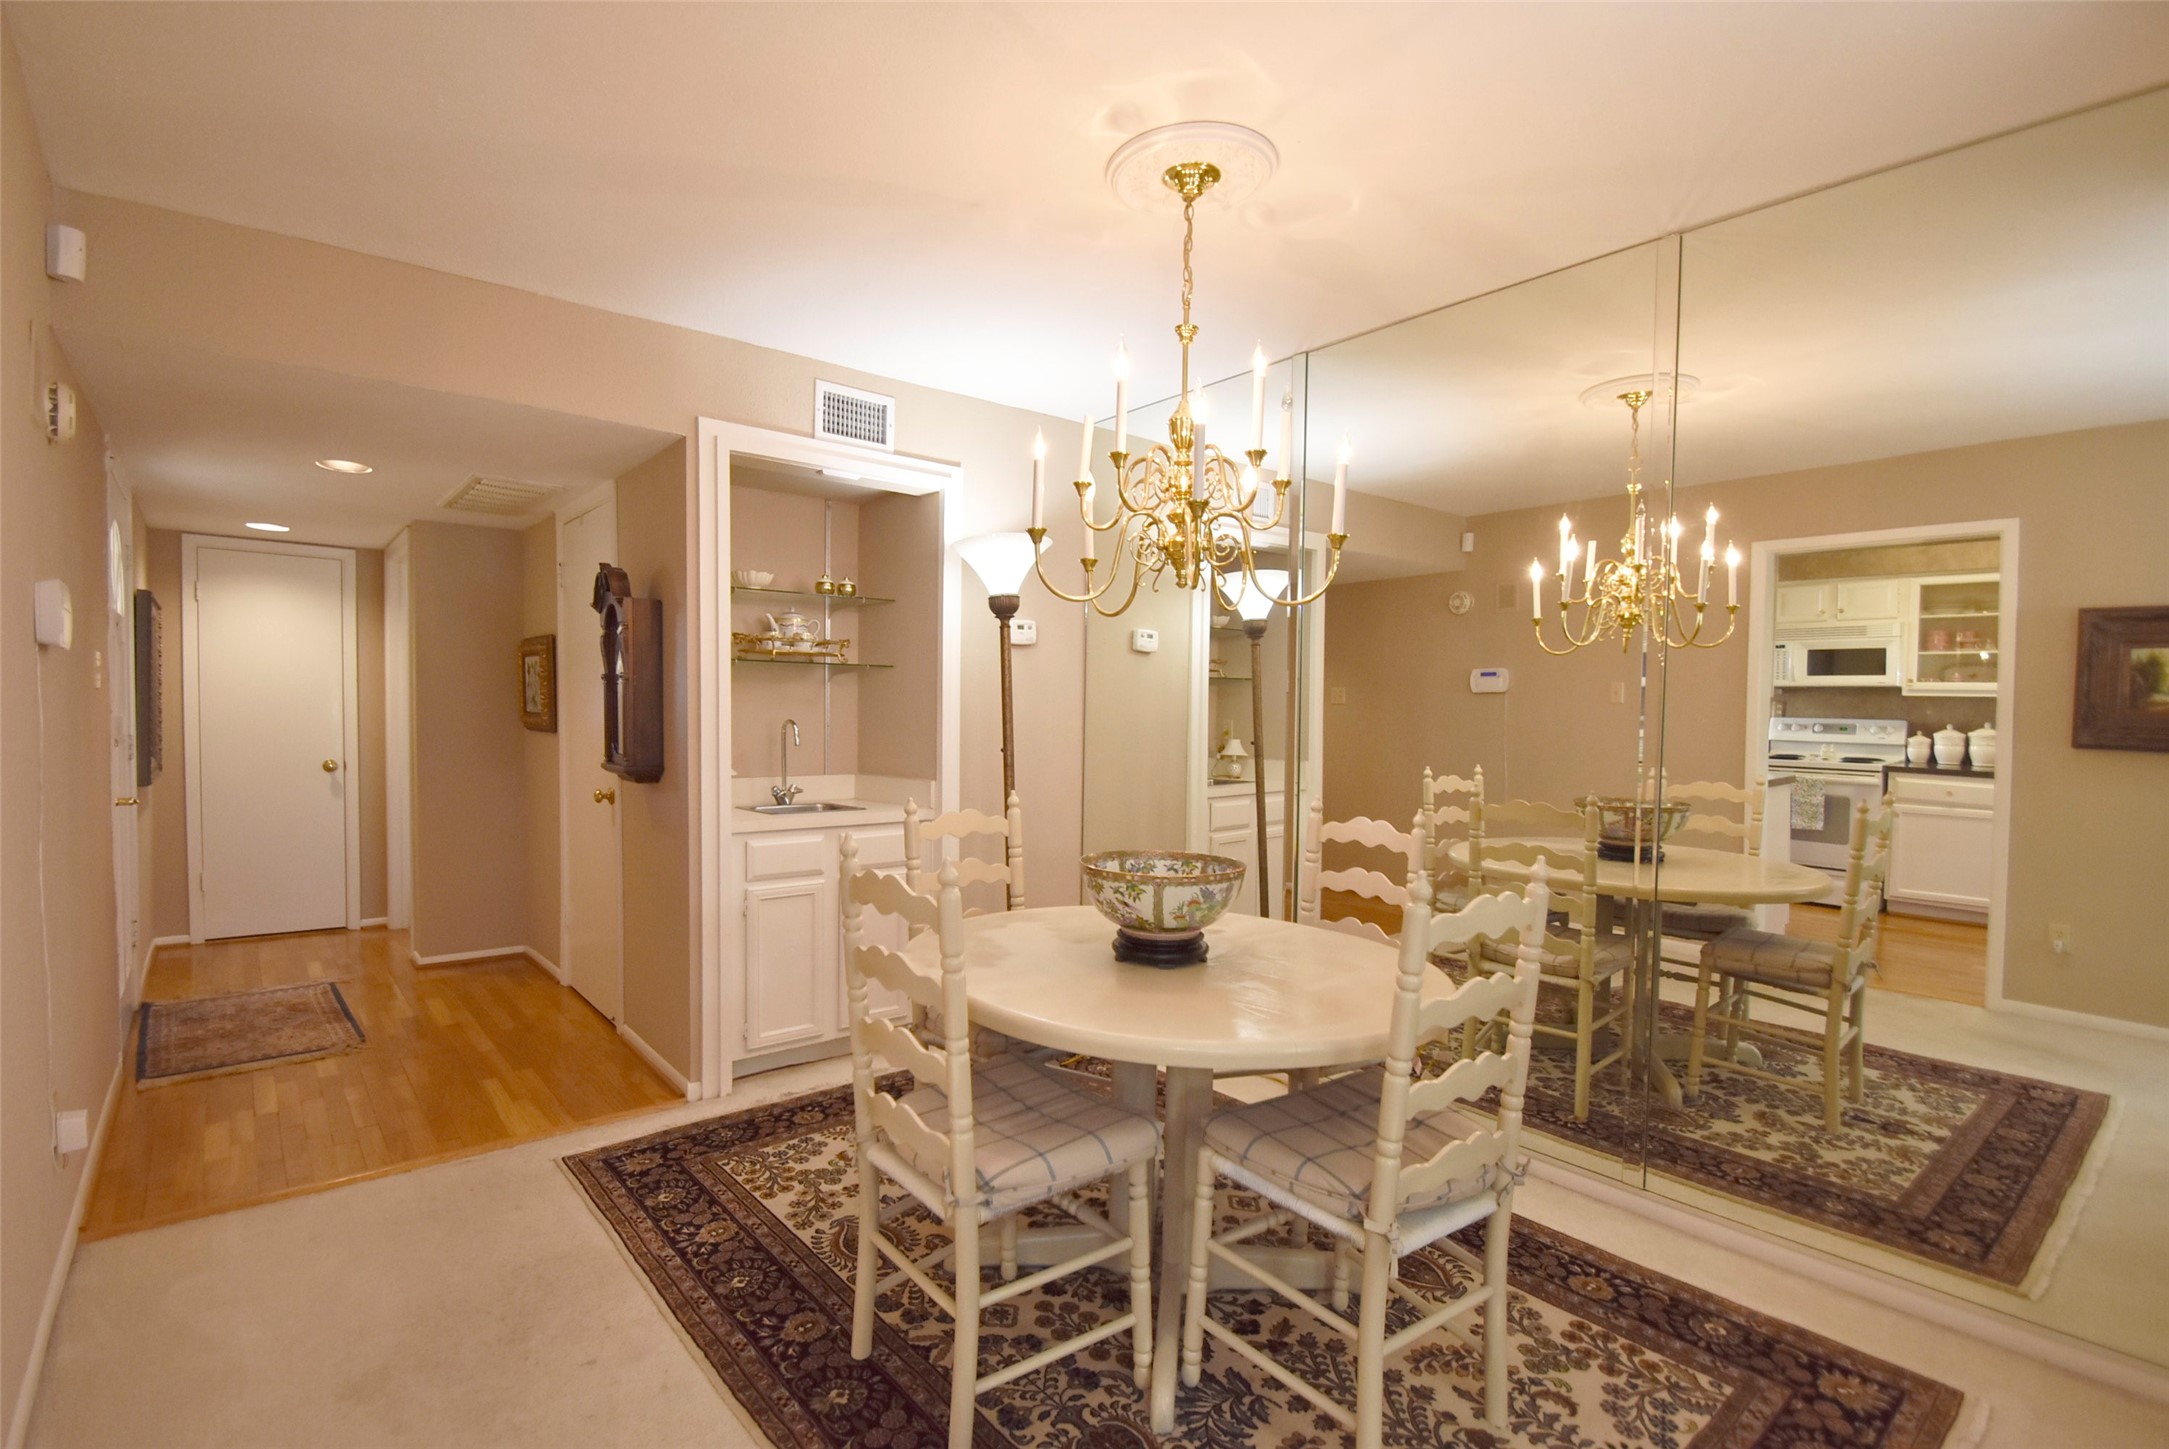 The dining area is right by the kitchen and flows into the living area, There is a wet bar with shelving.